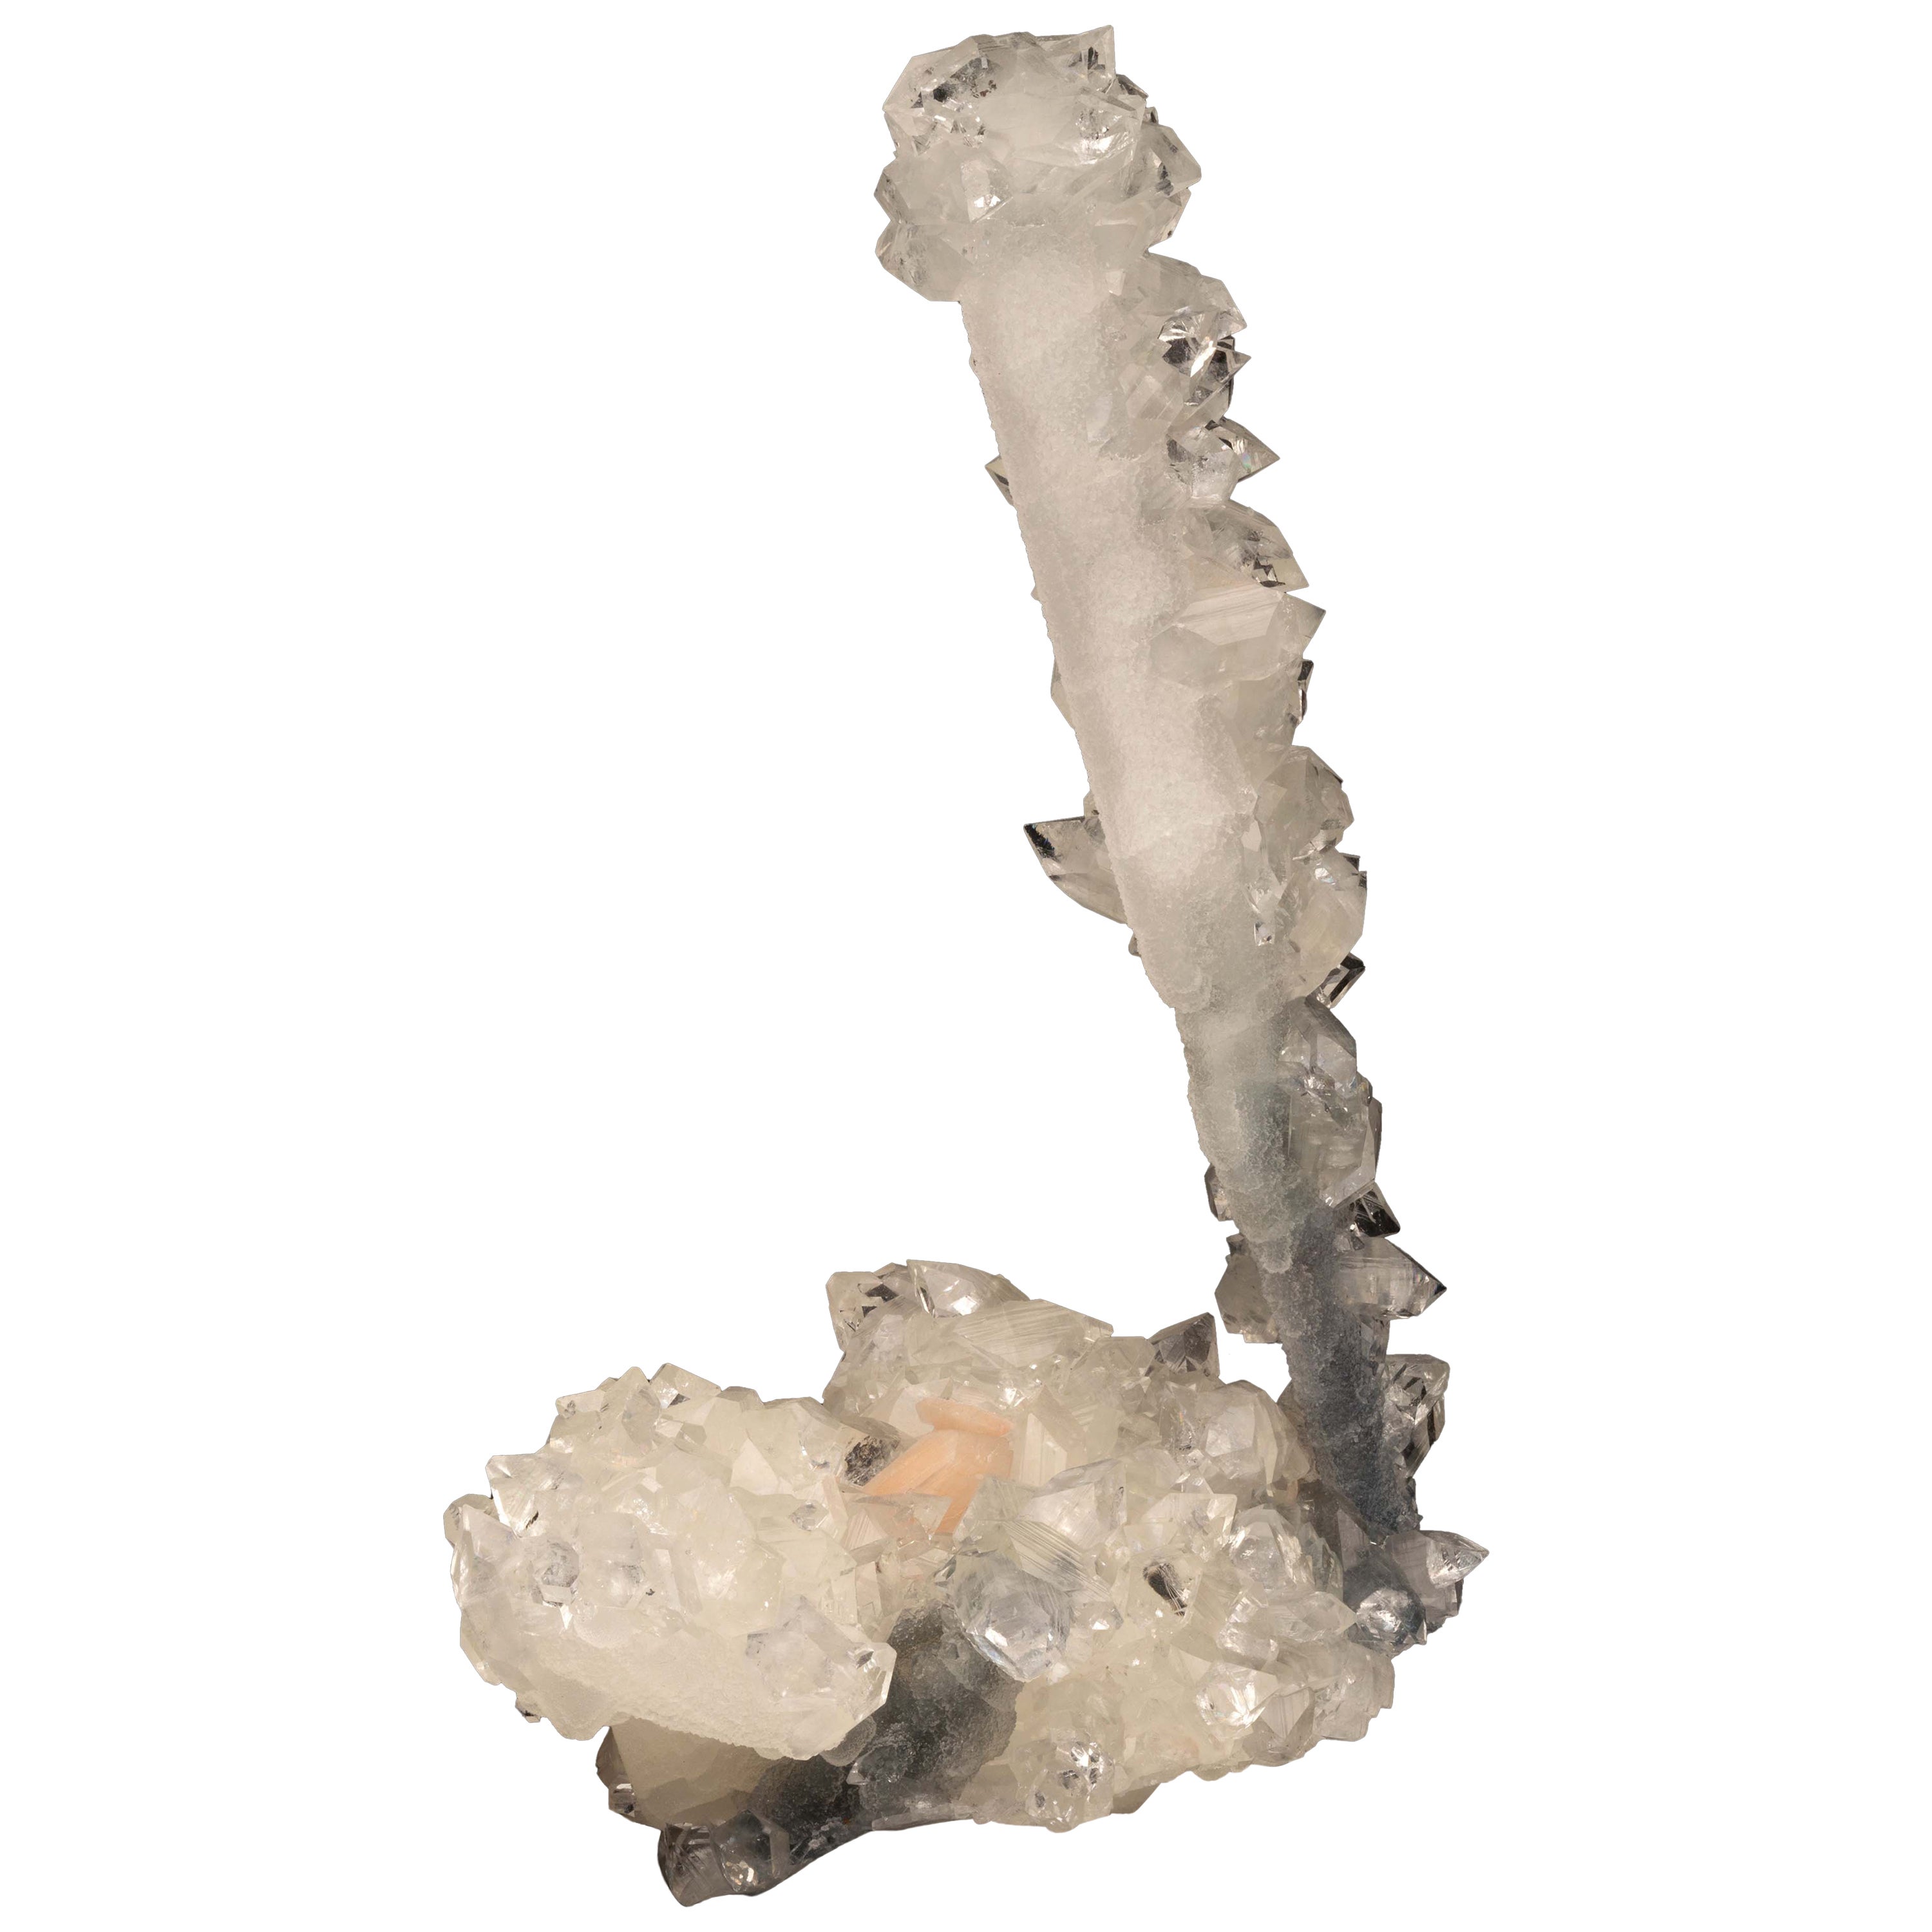 Apophyllite "Lollipop" with Calcite over Agate Stalactite For Sale